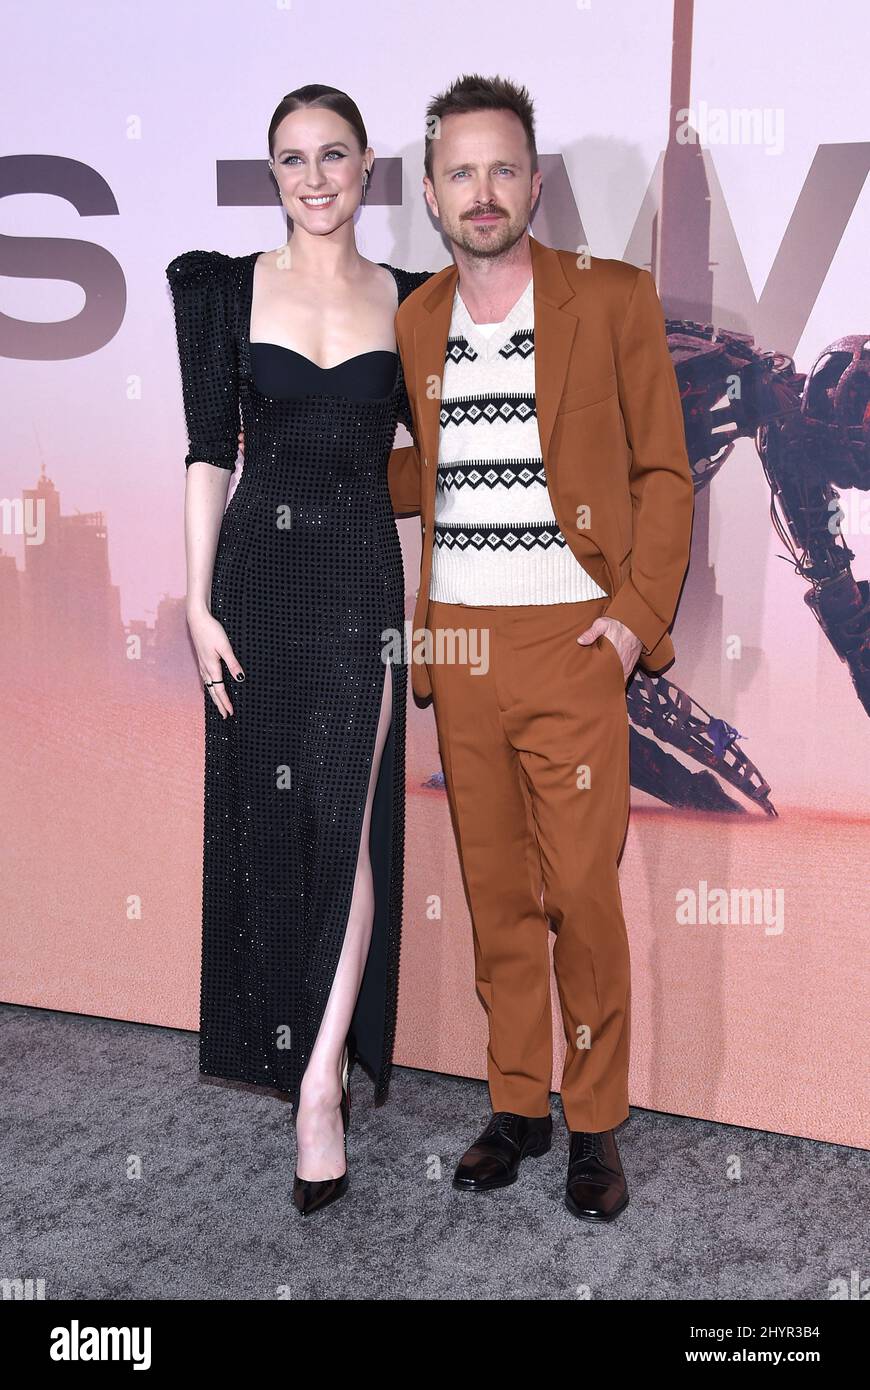 Evan Rachel Wood and Aaron Paul at the 'Westwood' season 3 Los Angeles premiere held at the TCL Chinese Theatre Stock Photo